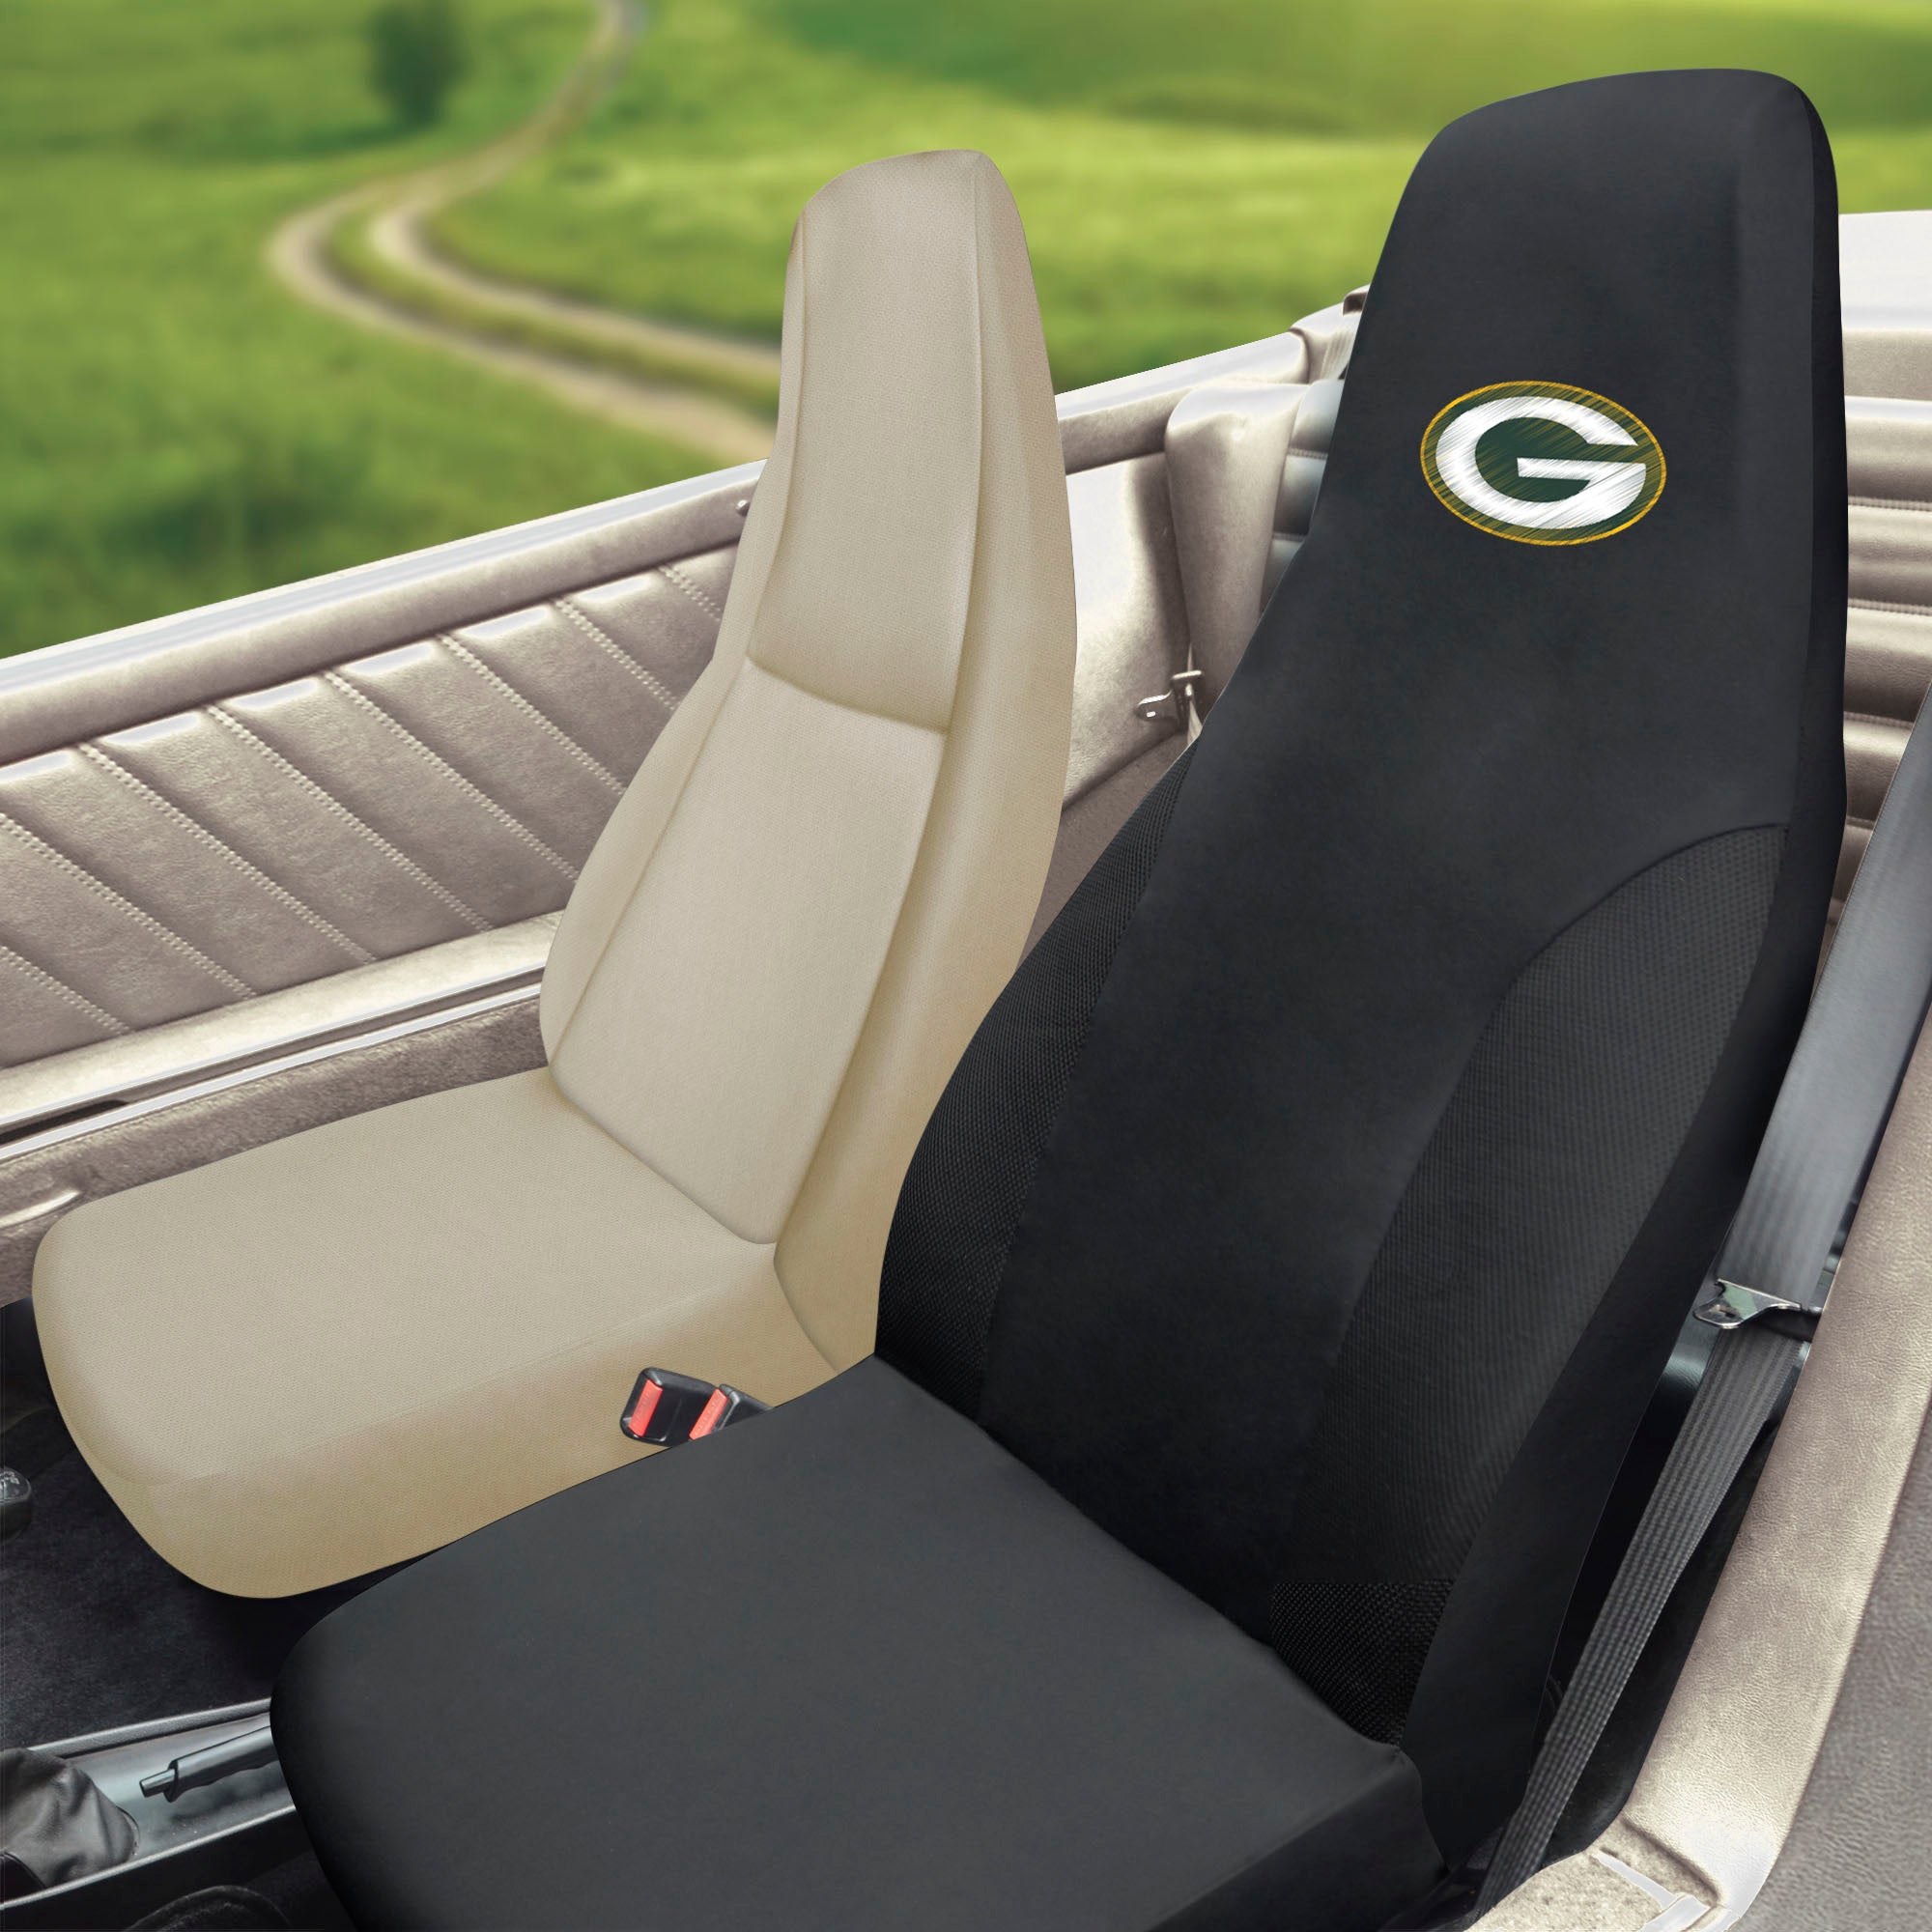 NFL - Green Bay Packers Set of 2 Car Seat Covers